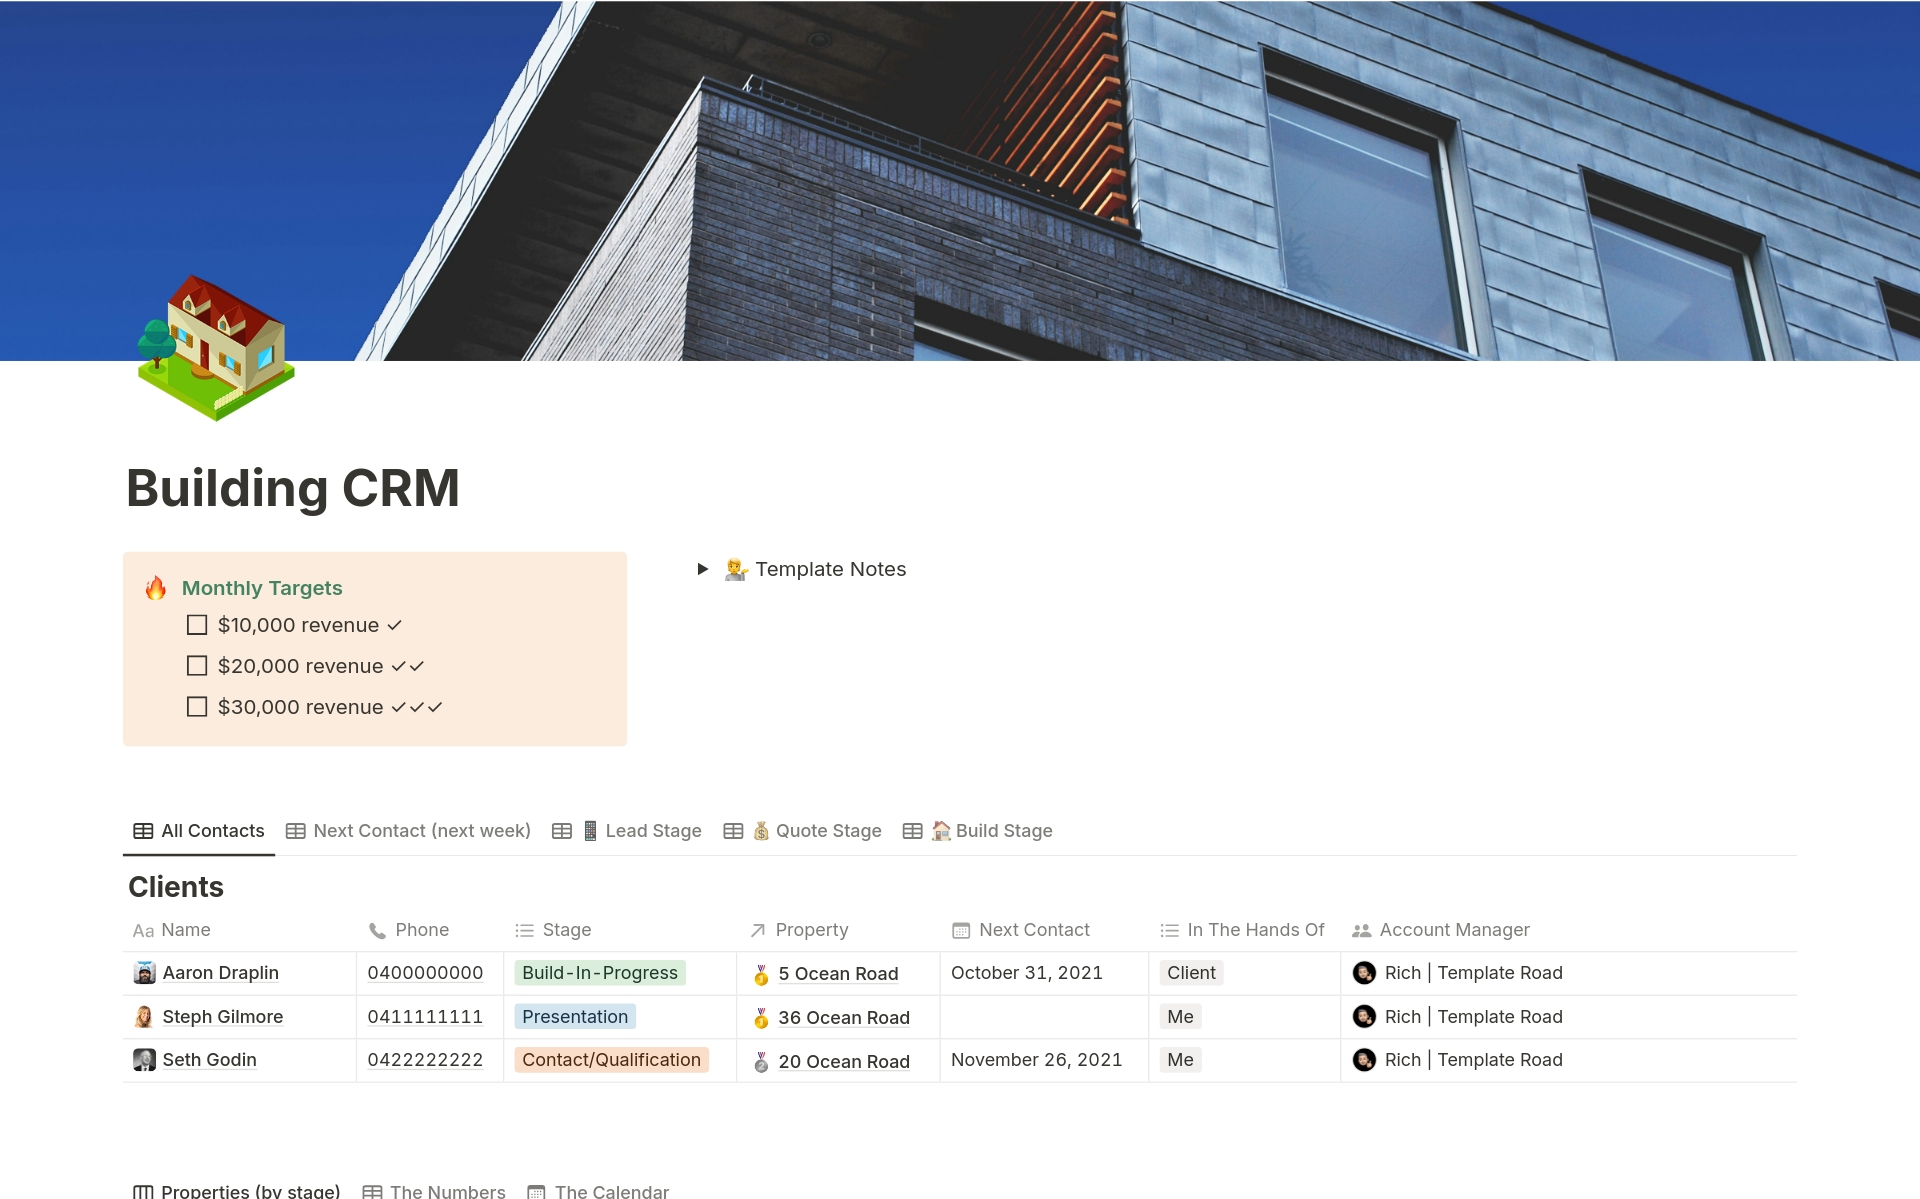 If you’re looking to build a CRM in Notion for your building company, you’re in the right spot. By using Notion to build your CRM, you can create the custom builder CRM that you need in your favourite tool.